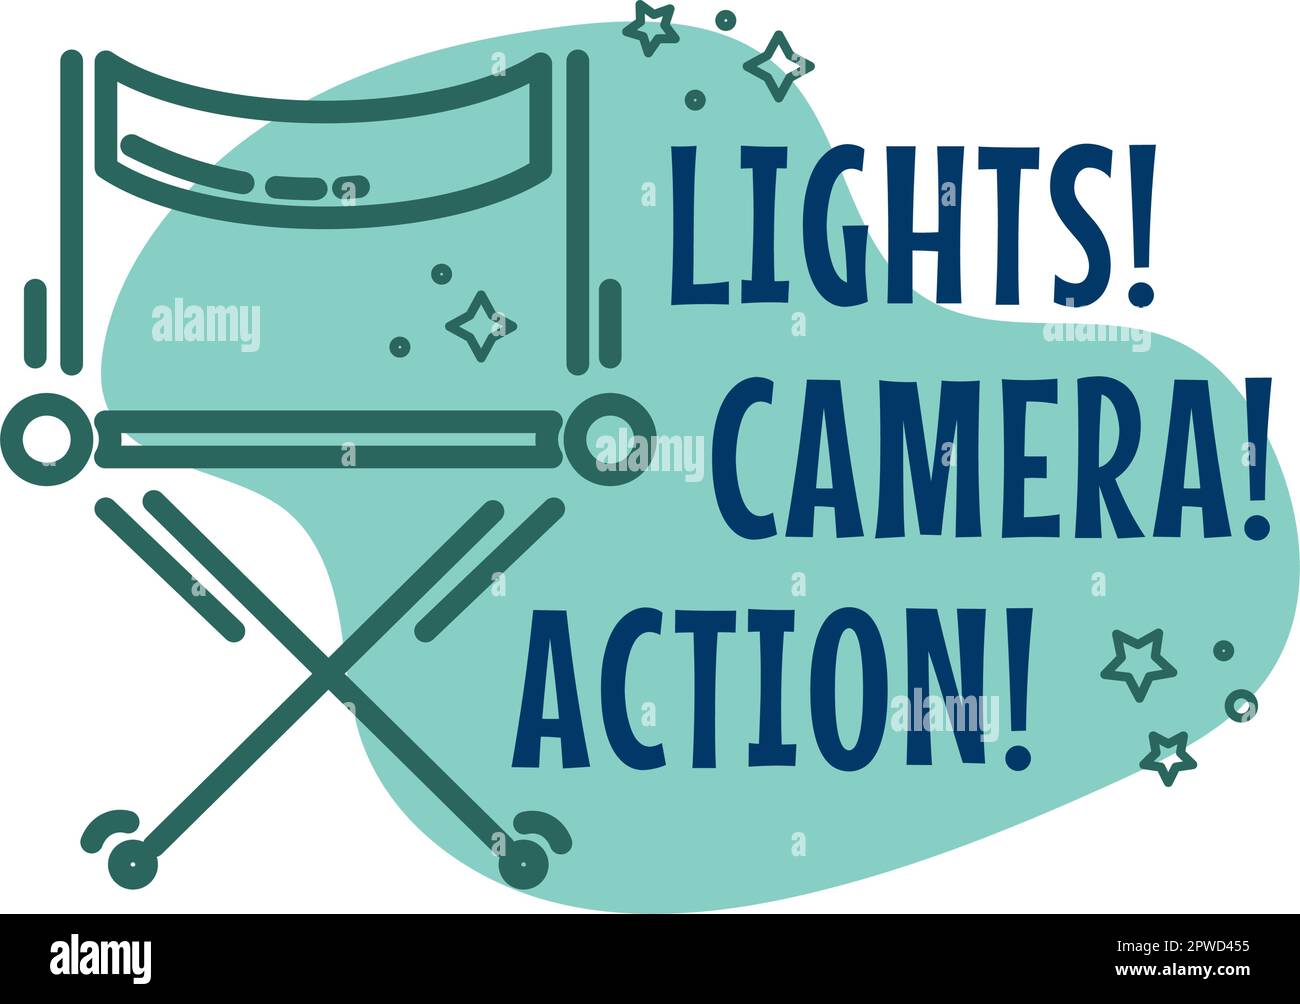 Lights camera, action, movie director or producer Stock Vector